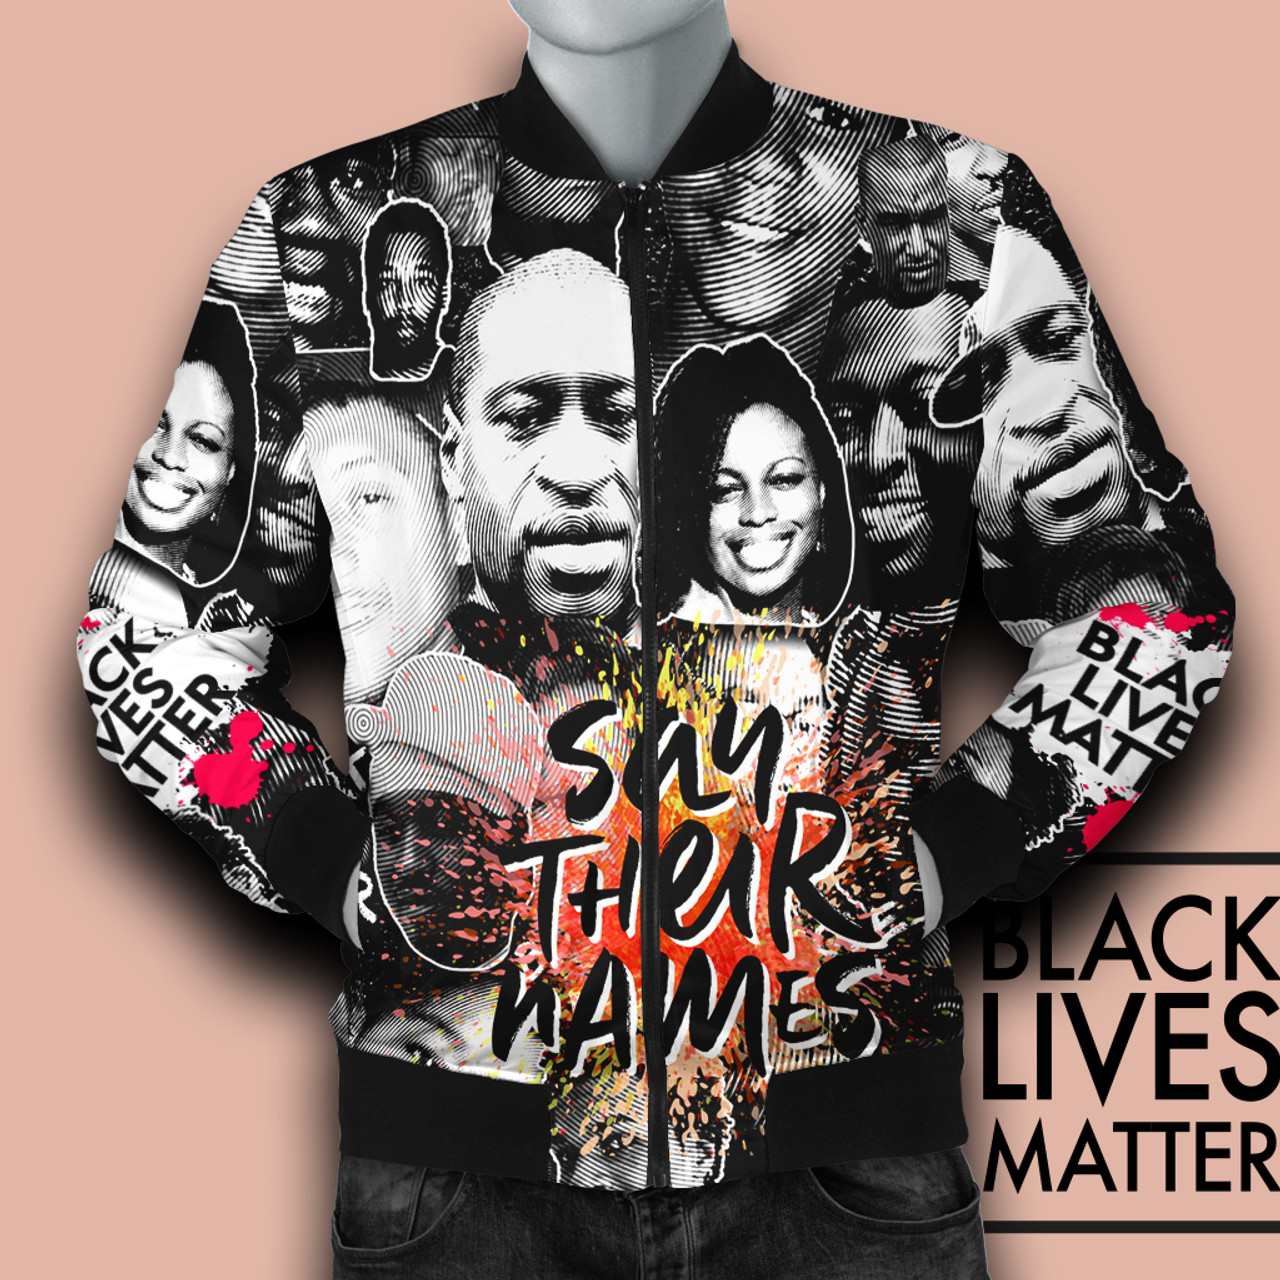 African Bomber Jacket - Say Their Names Black History Month Bomber Jacket